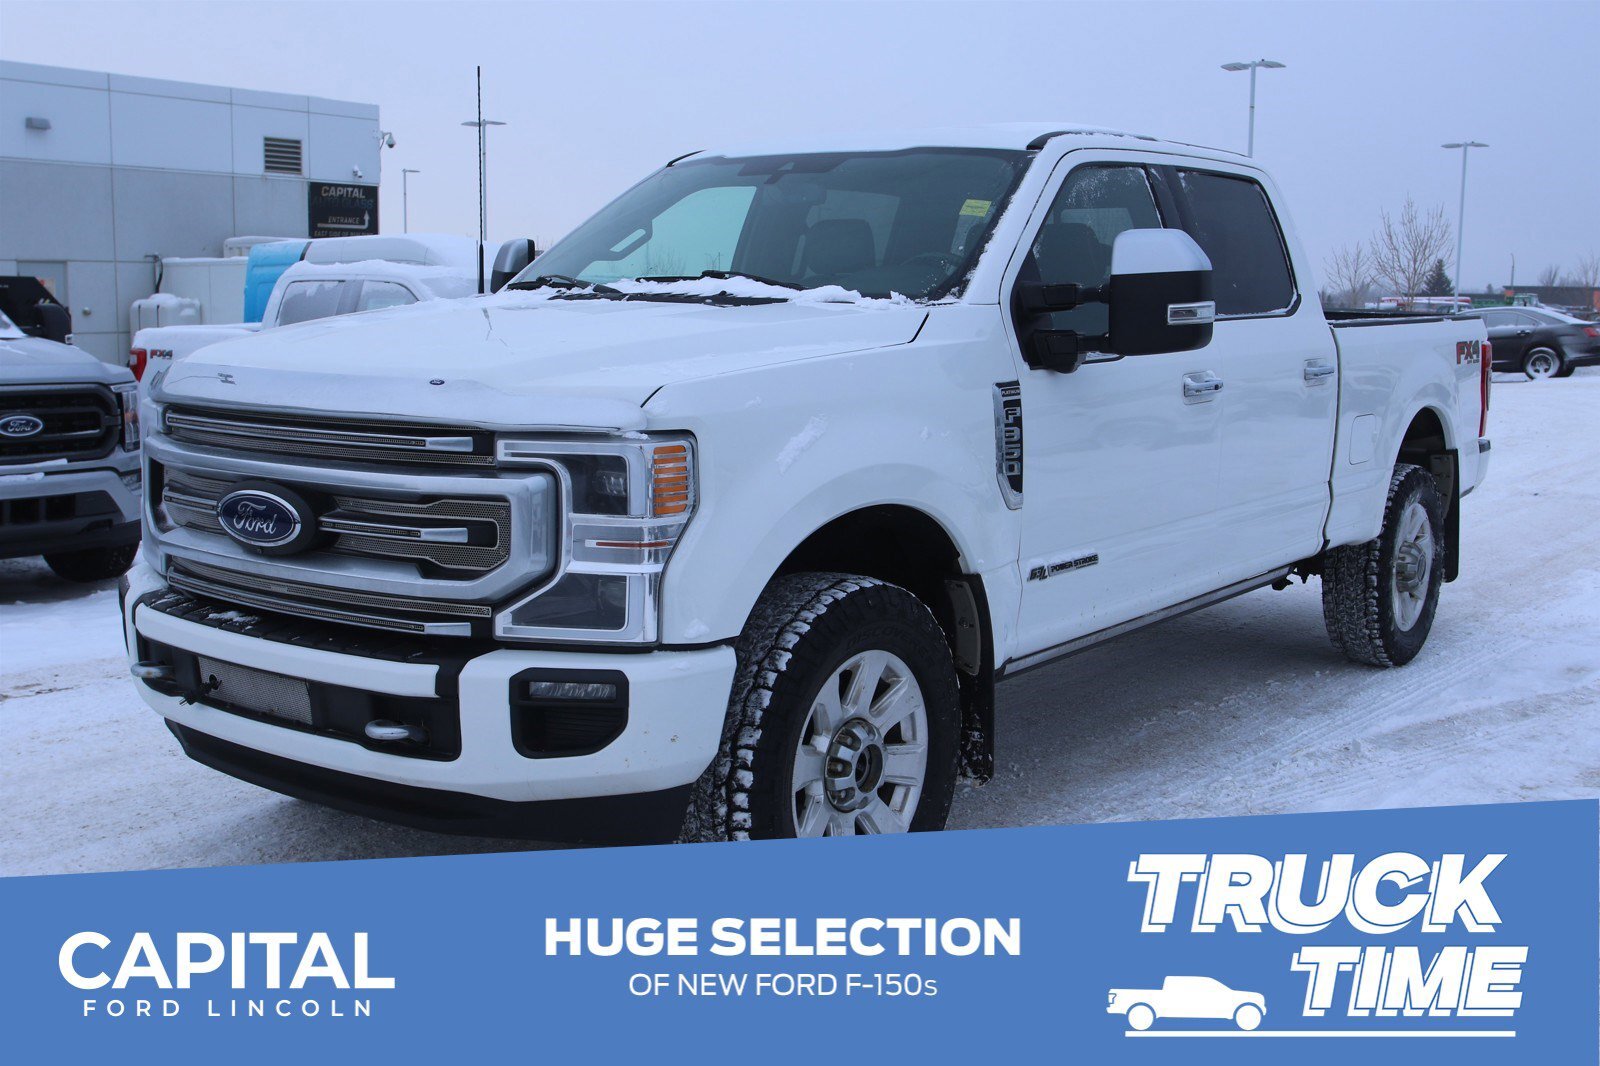 2021 Ford F-350 Platinum SuperCrew **One Owner, Leather, Sunroof, 